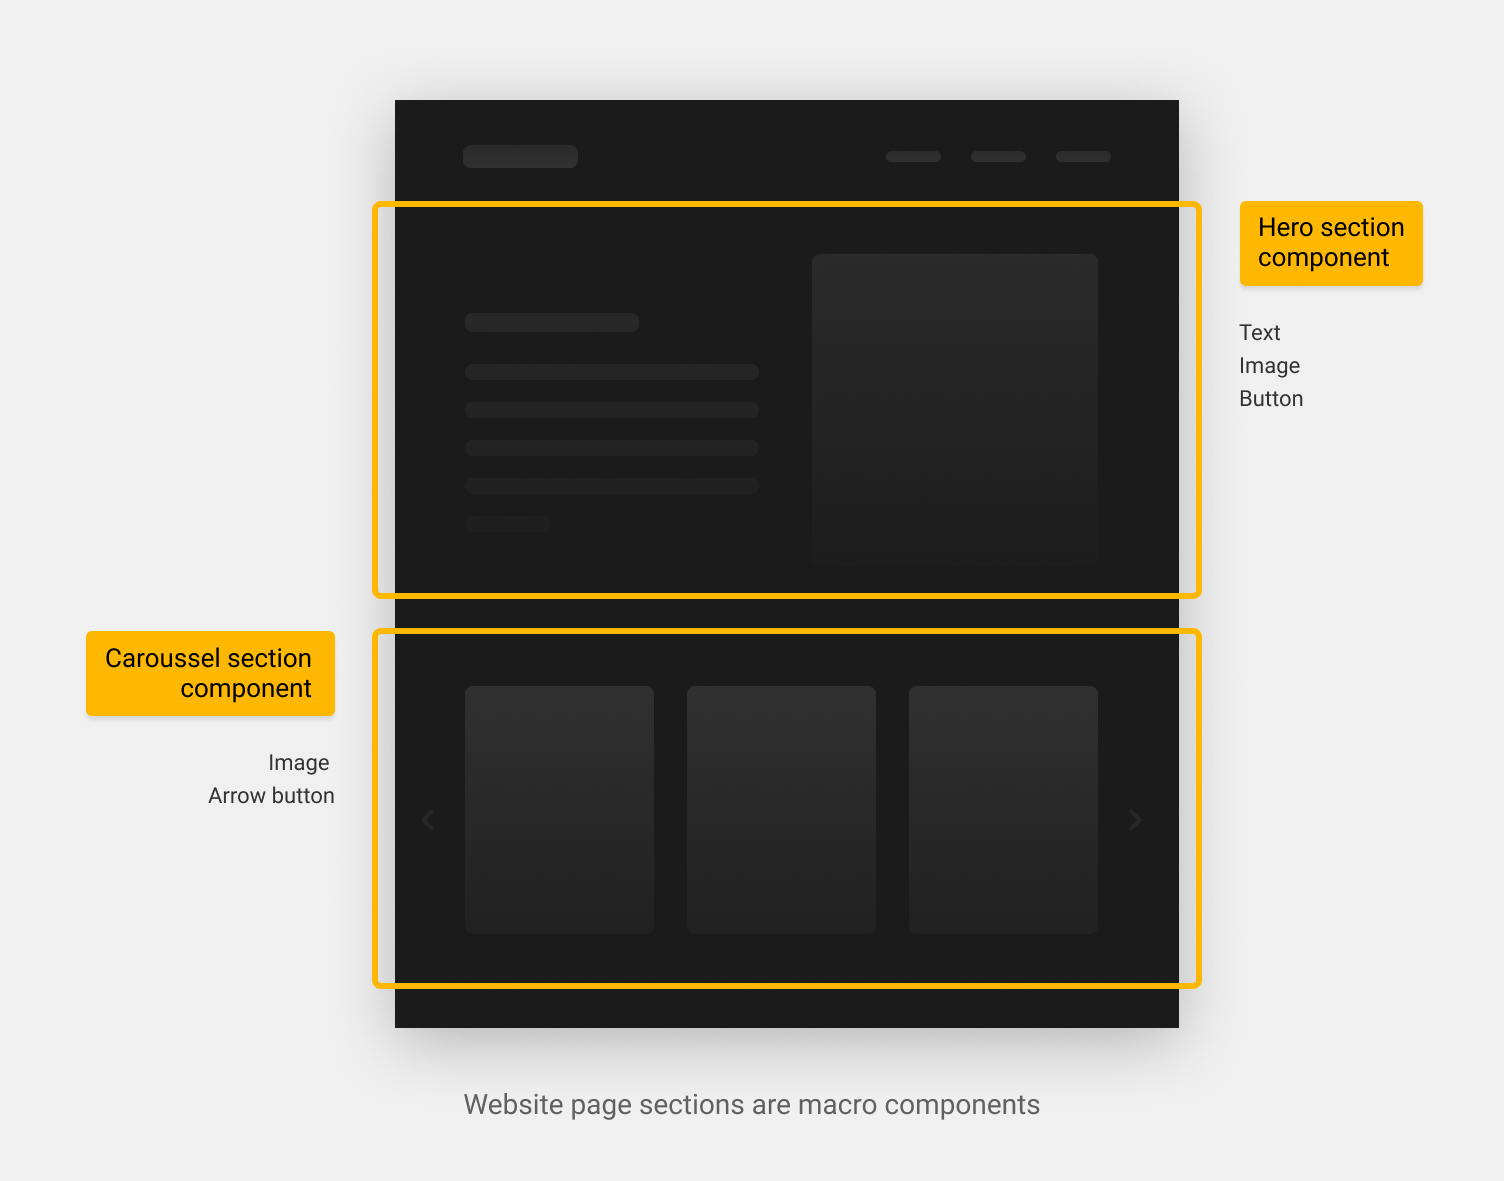 Website page sections are macro components